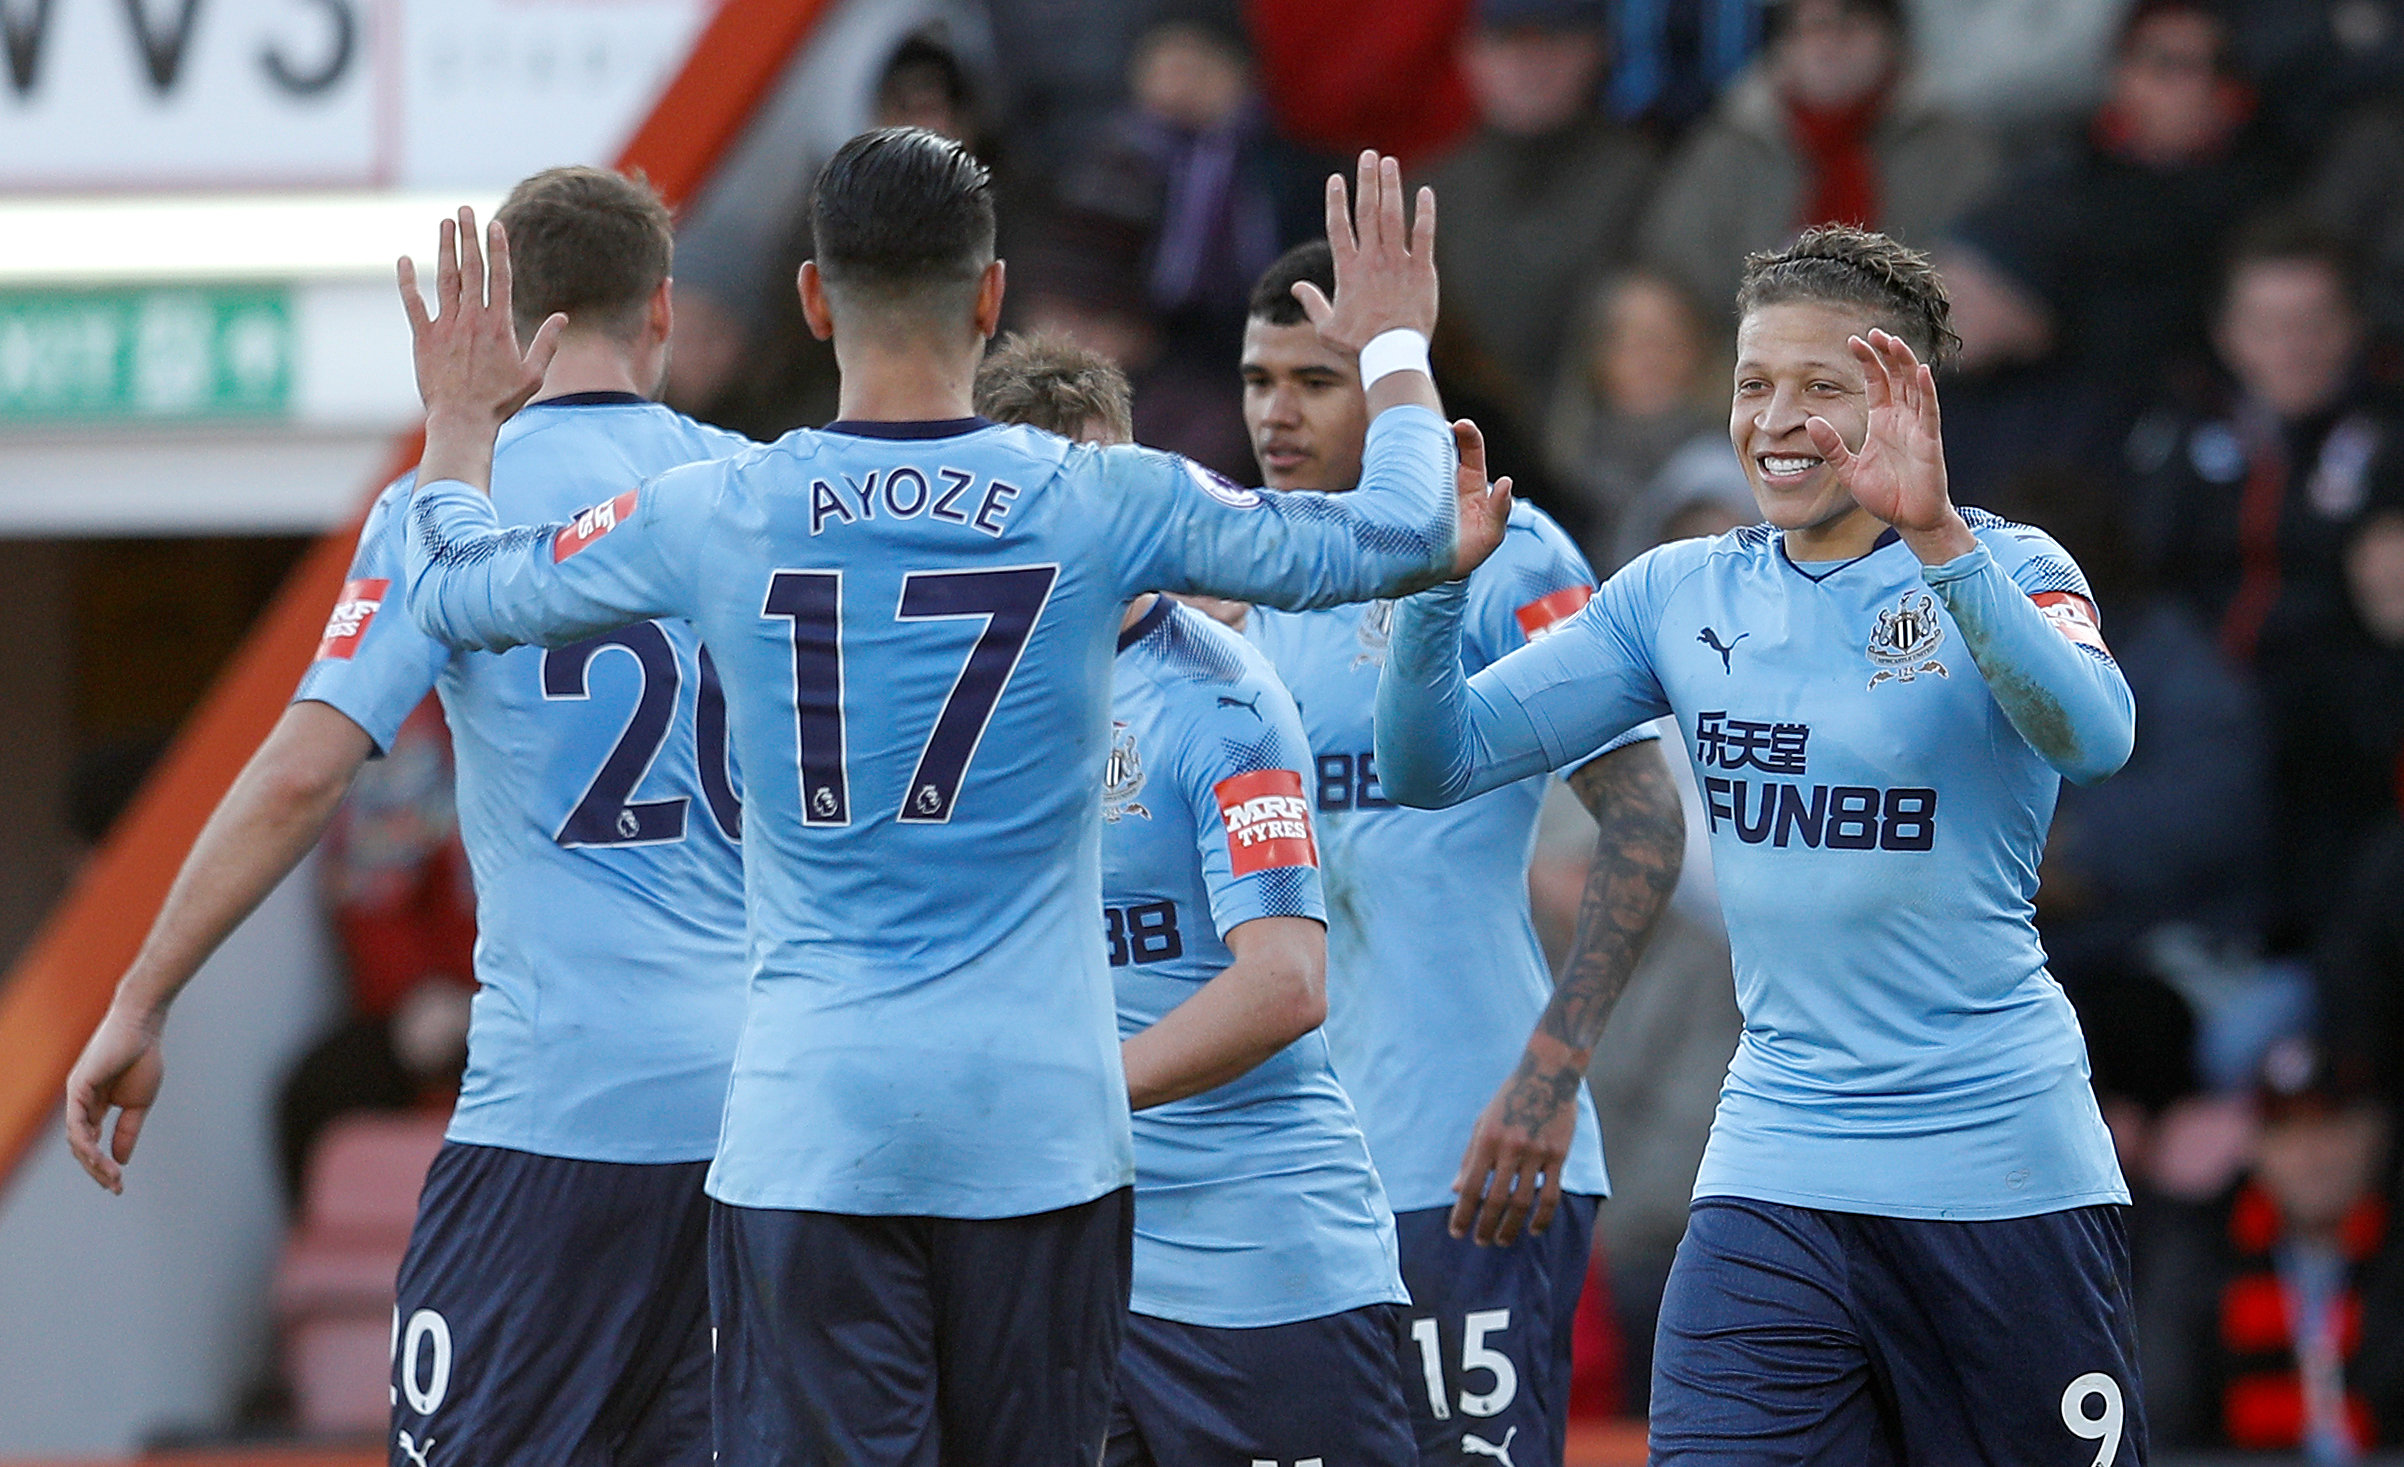 Bournemouth 2-2 Newcastle United: Three talking points from the Vitality Stadium